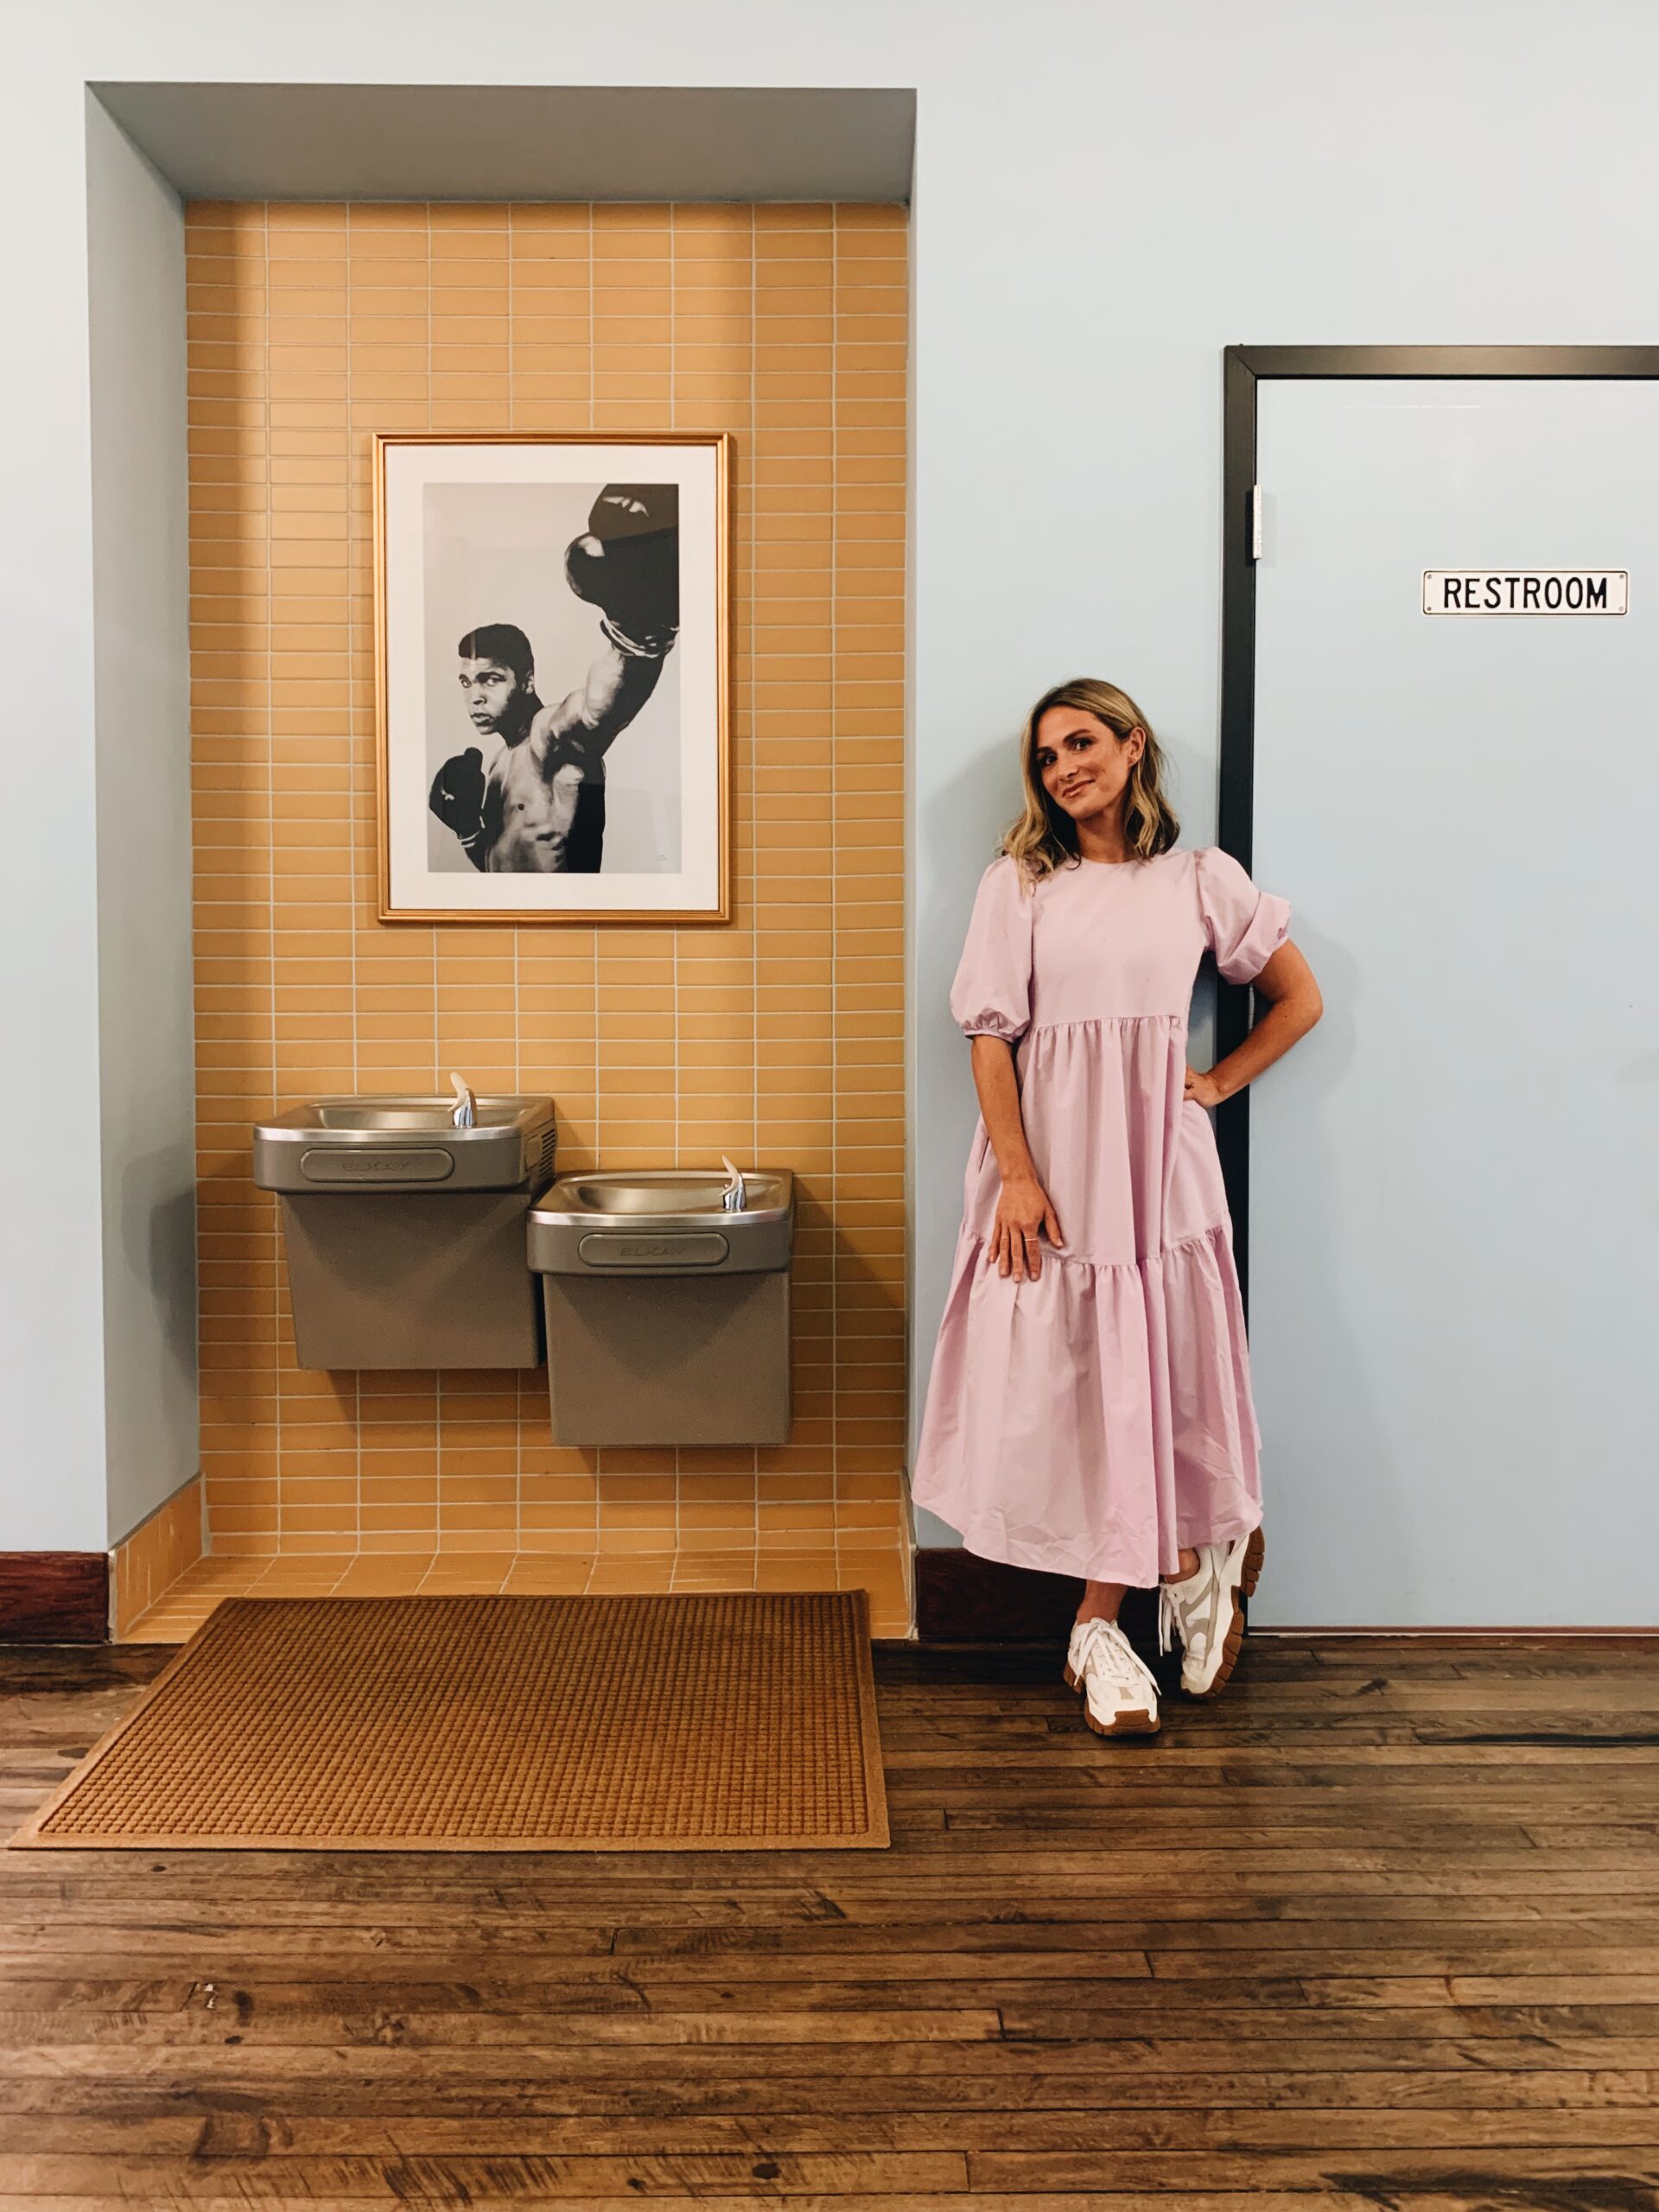 Profile: Detroit Achievement Academy Founder Kyle Smitley on Starting a Charter School, Expansion, and Her “Unhinged” Love for Facilities Projects